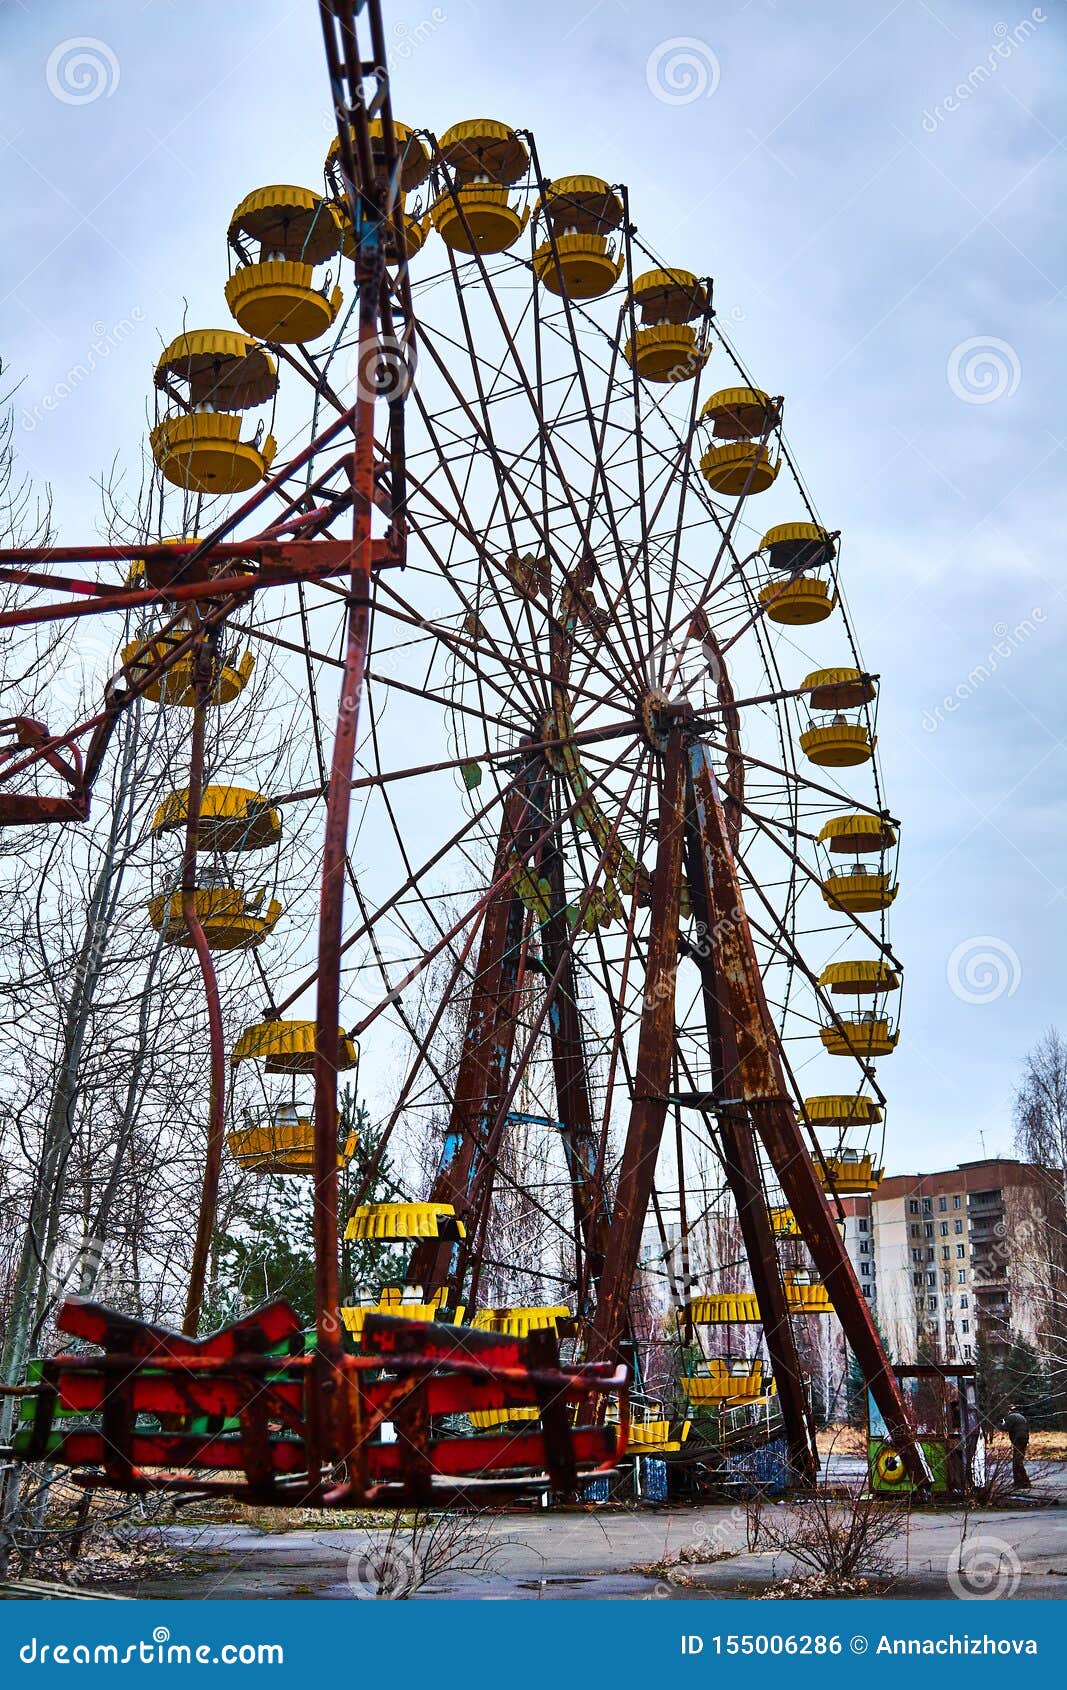 old ferris wheel in the ghost town of pripyat. consequences of the accident at the chernobil nuclear power plant